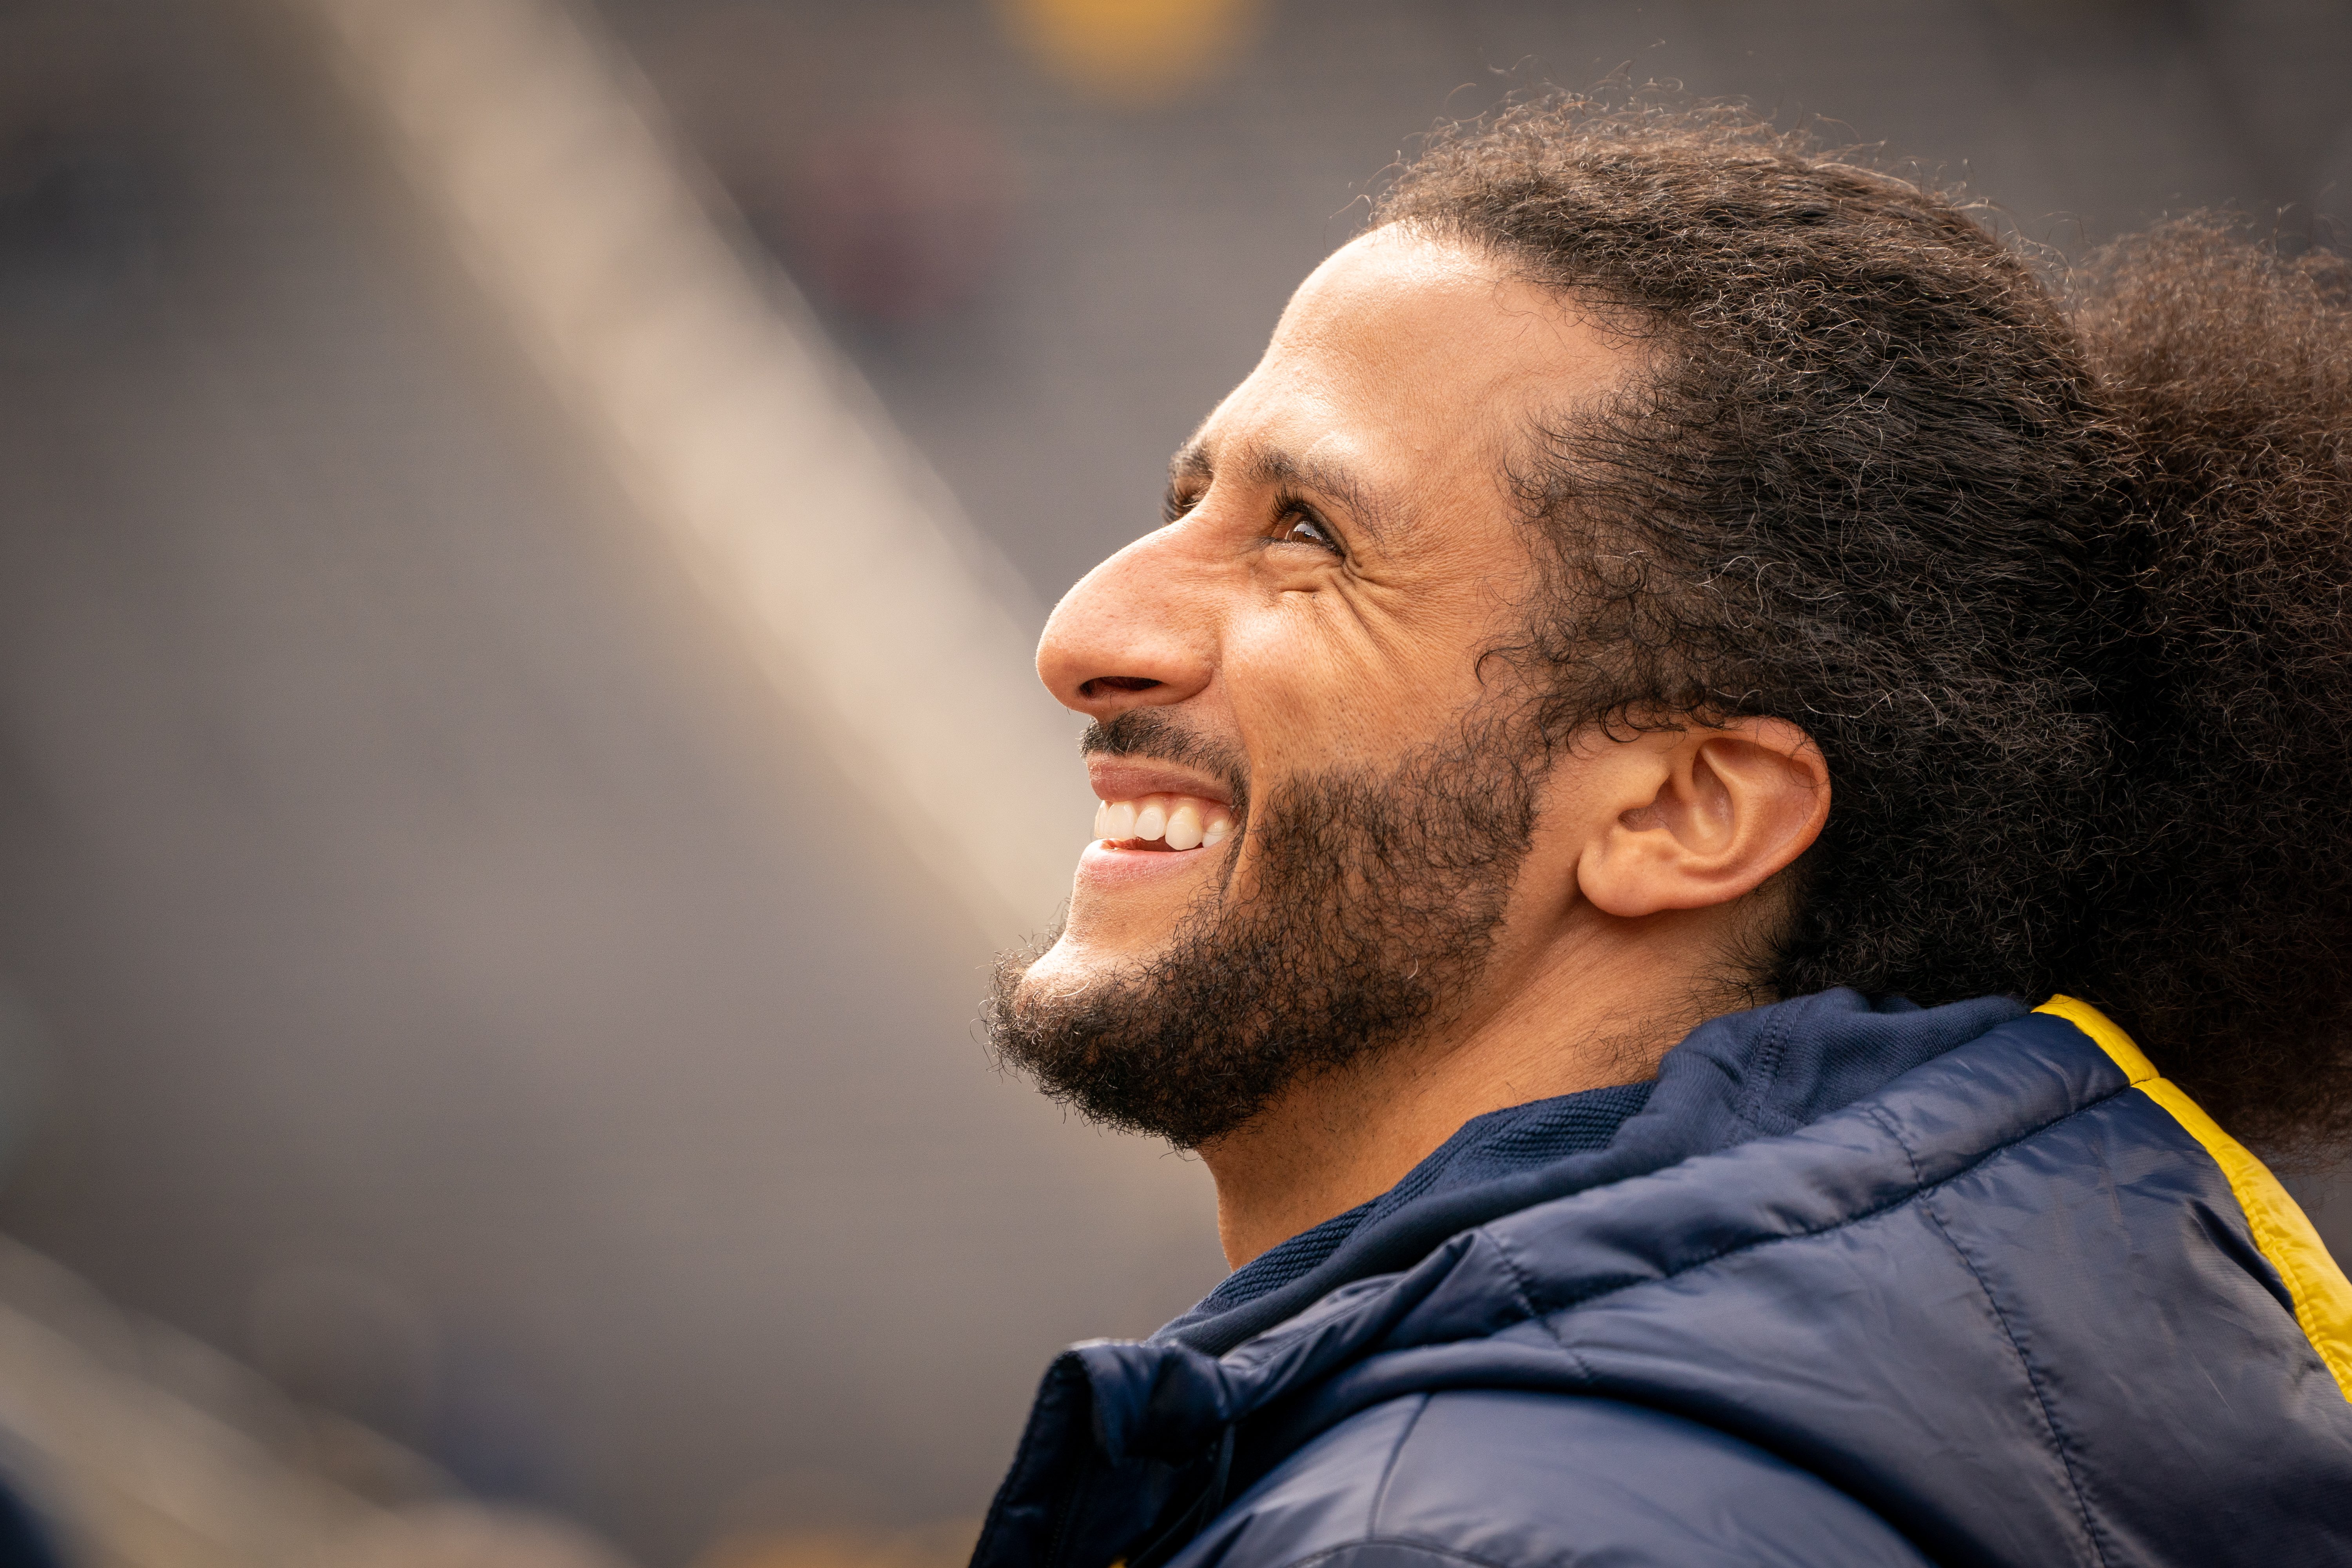 Colin Kaepernick pictured as he interacts with fans during the Michigan spring football game at Michigan Stadium in Ann Arbor | Source: Getty Images